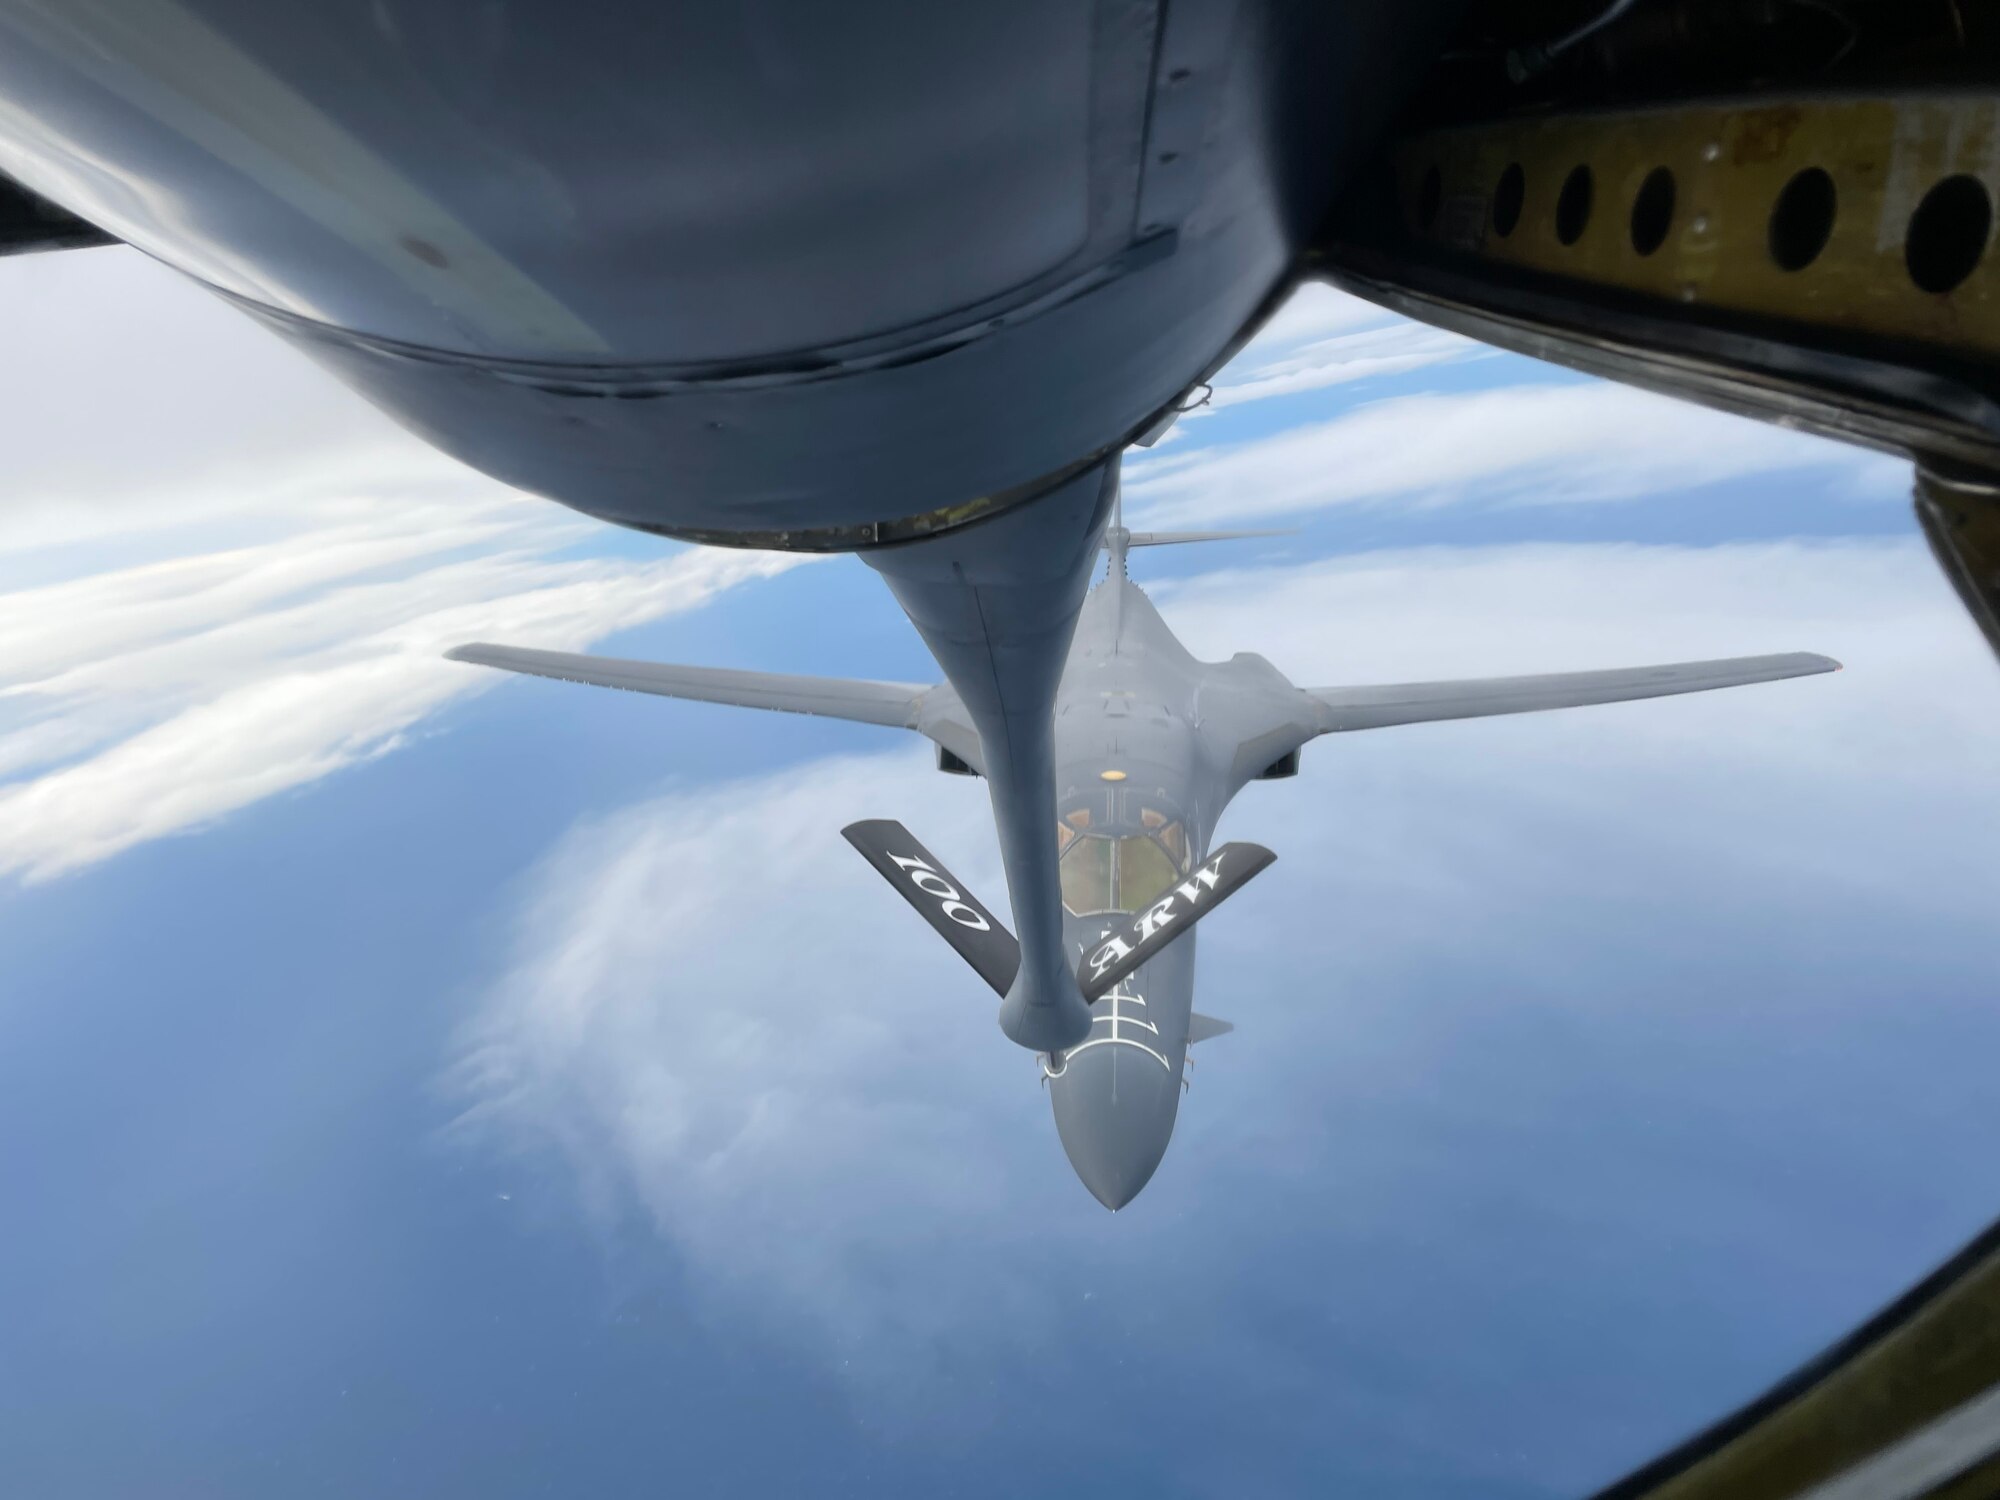 A U.S. Air Force B-1B Lancer aircraft assigned to the 9th Expeditionary Bomb Squadron approaches a KC-135 Stratotanker aircraft assigned to the 100th Air Refueling Wing, Royal Air Force Mildenhall, England, to receive fuel during exercise Castle Forge off the coast of Norway, Nov. 1, 2021. Forward-deployed forces are engaged, postured and ready with credible force to assure, deter and defend in an increasingly complex security environment. Alongside F-15 operations in the Black Sea Region, Castle Forge encompasses the USAFE MAJCOM-wide Agile Combat Employment Initial Operating Capability capstone event. Both Castle Forge’s components will better enable forces to quickly disperse and continue to deliver air power from locations with varying levels of capacity and support, ensuring Airmen are always ready to respond to potential threats. (U.S. Air Force photo by Senior Airman Joseph Barron)